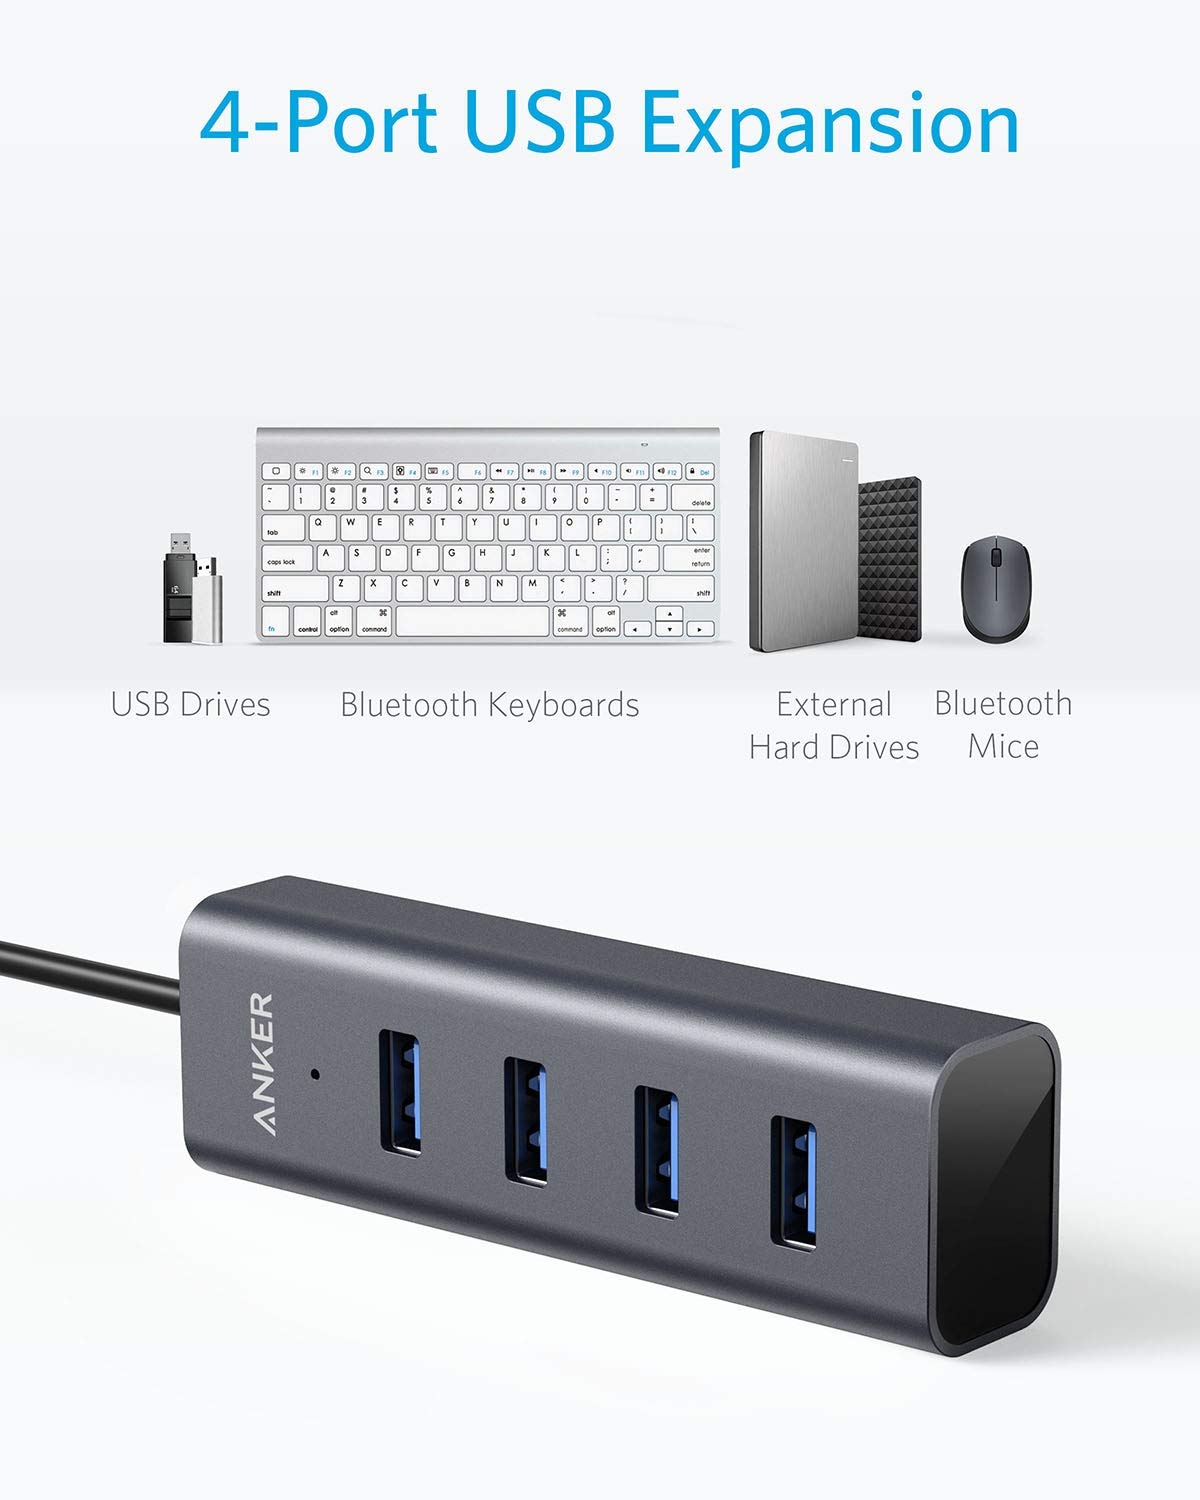 New Release] 4-Port USB 3.0 Data Hub with Individual Switches - General &  Product Discussion - Anker Community